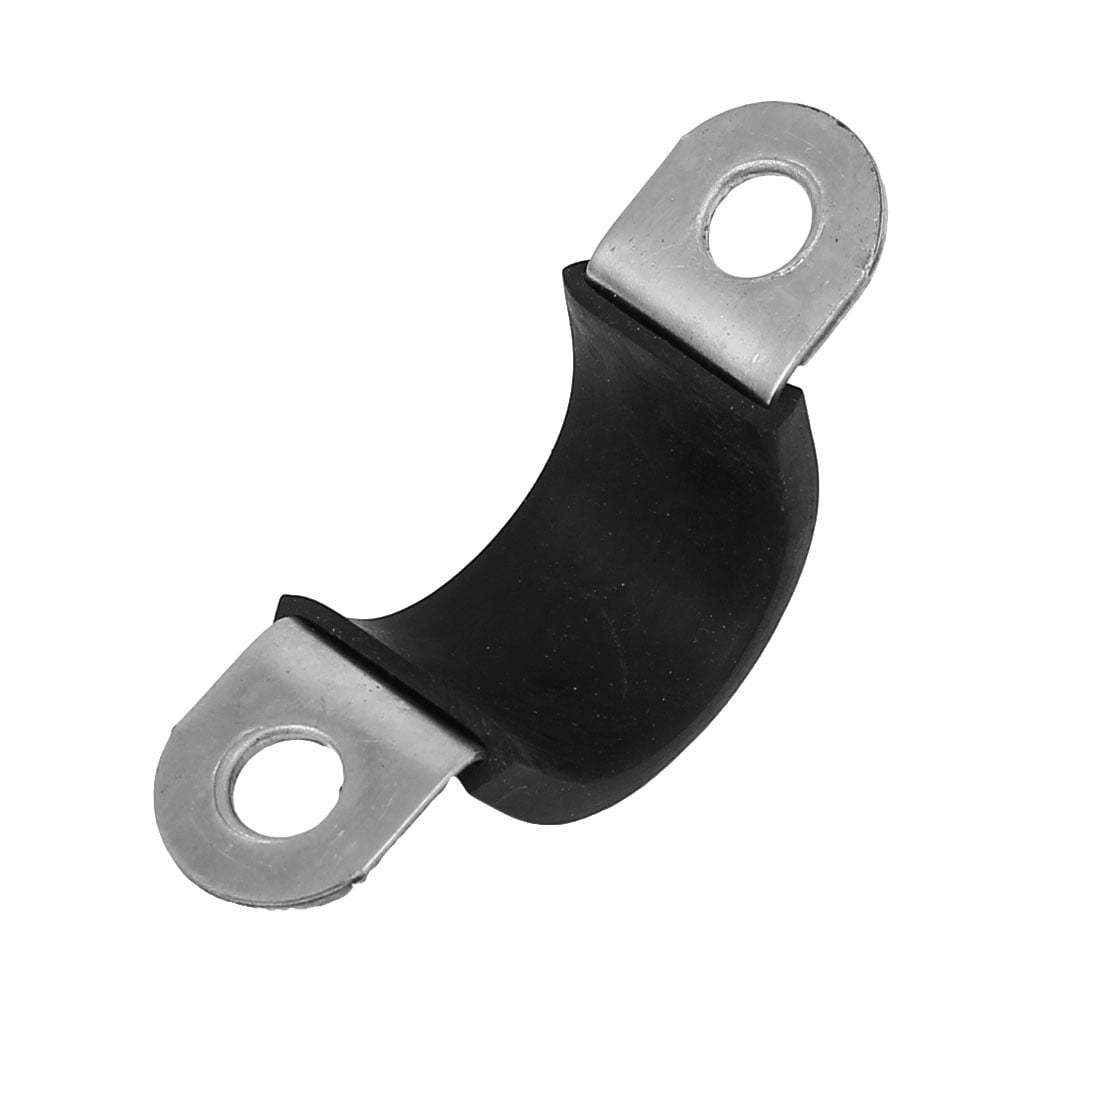 Aexit 18mm U Clips EPDM Rubber Lined Mounting Brackets Clamps 5pcs for Pipe Tube Cable 3a4a8dd6da377c0bfbaa84e692b5be01